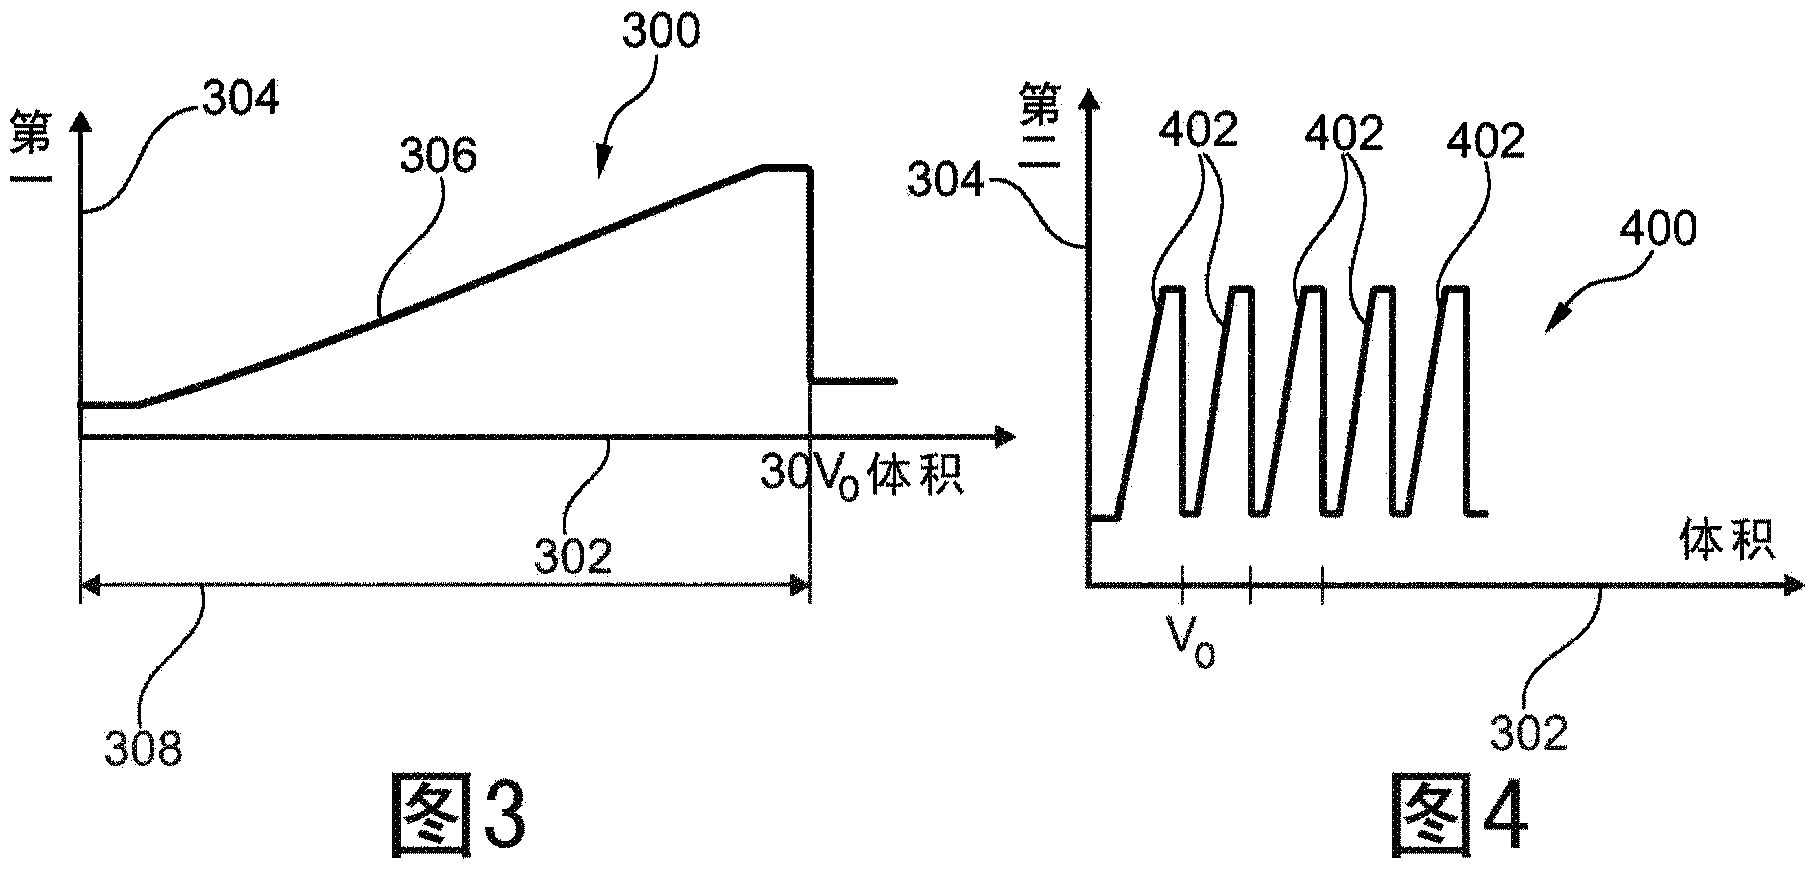 Two-dimensional fluid separation with controlled pressure